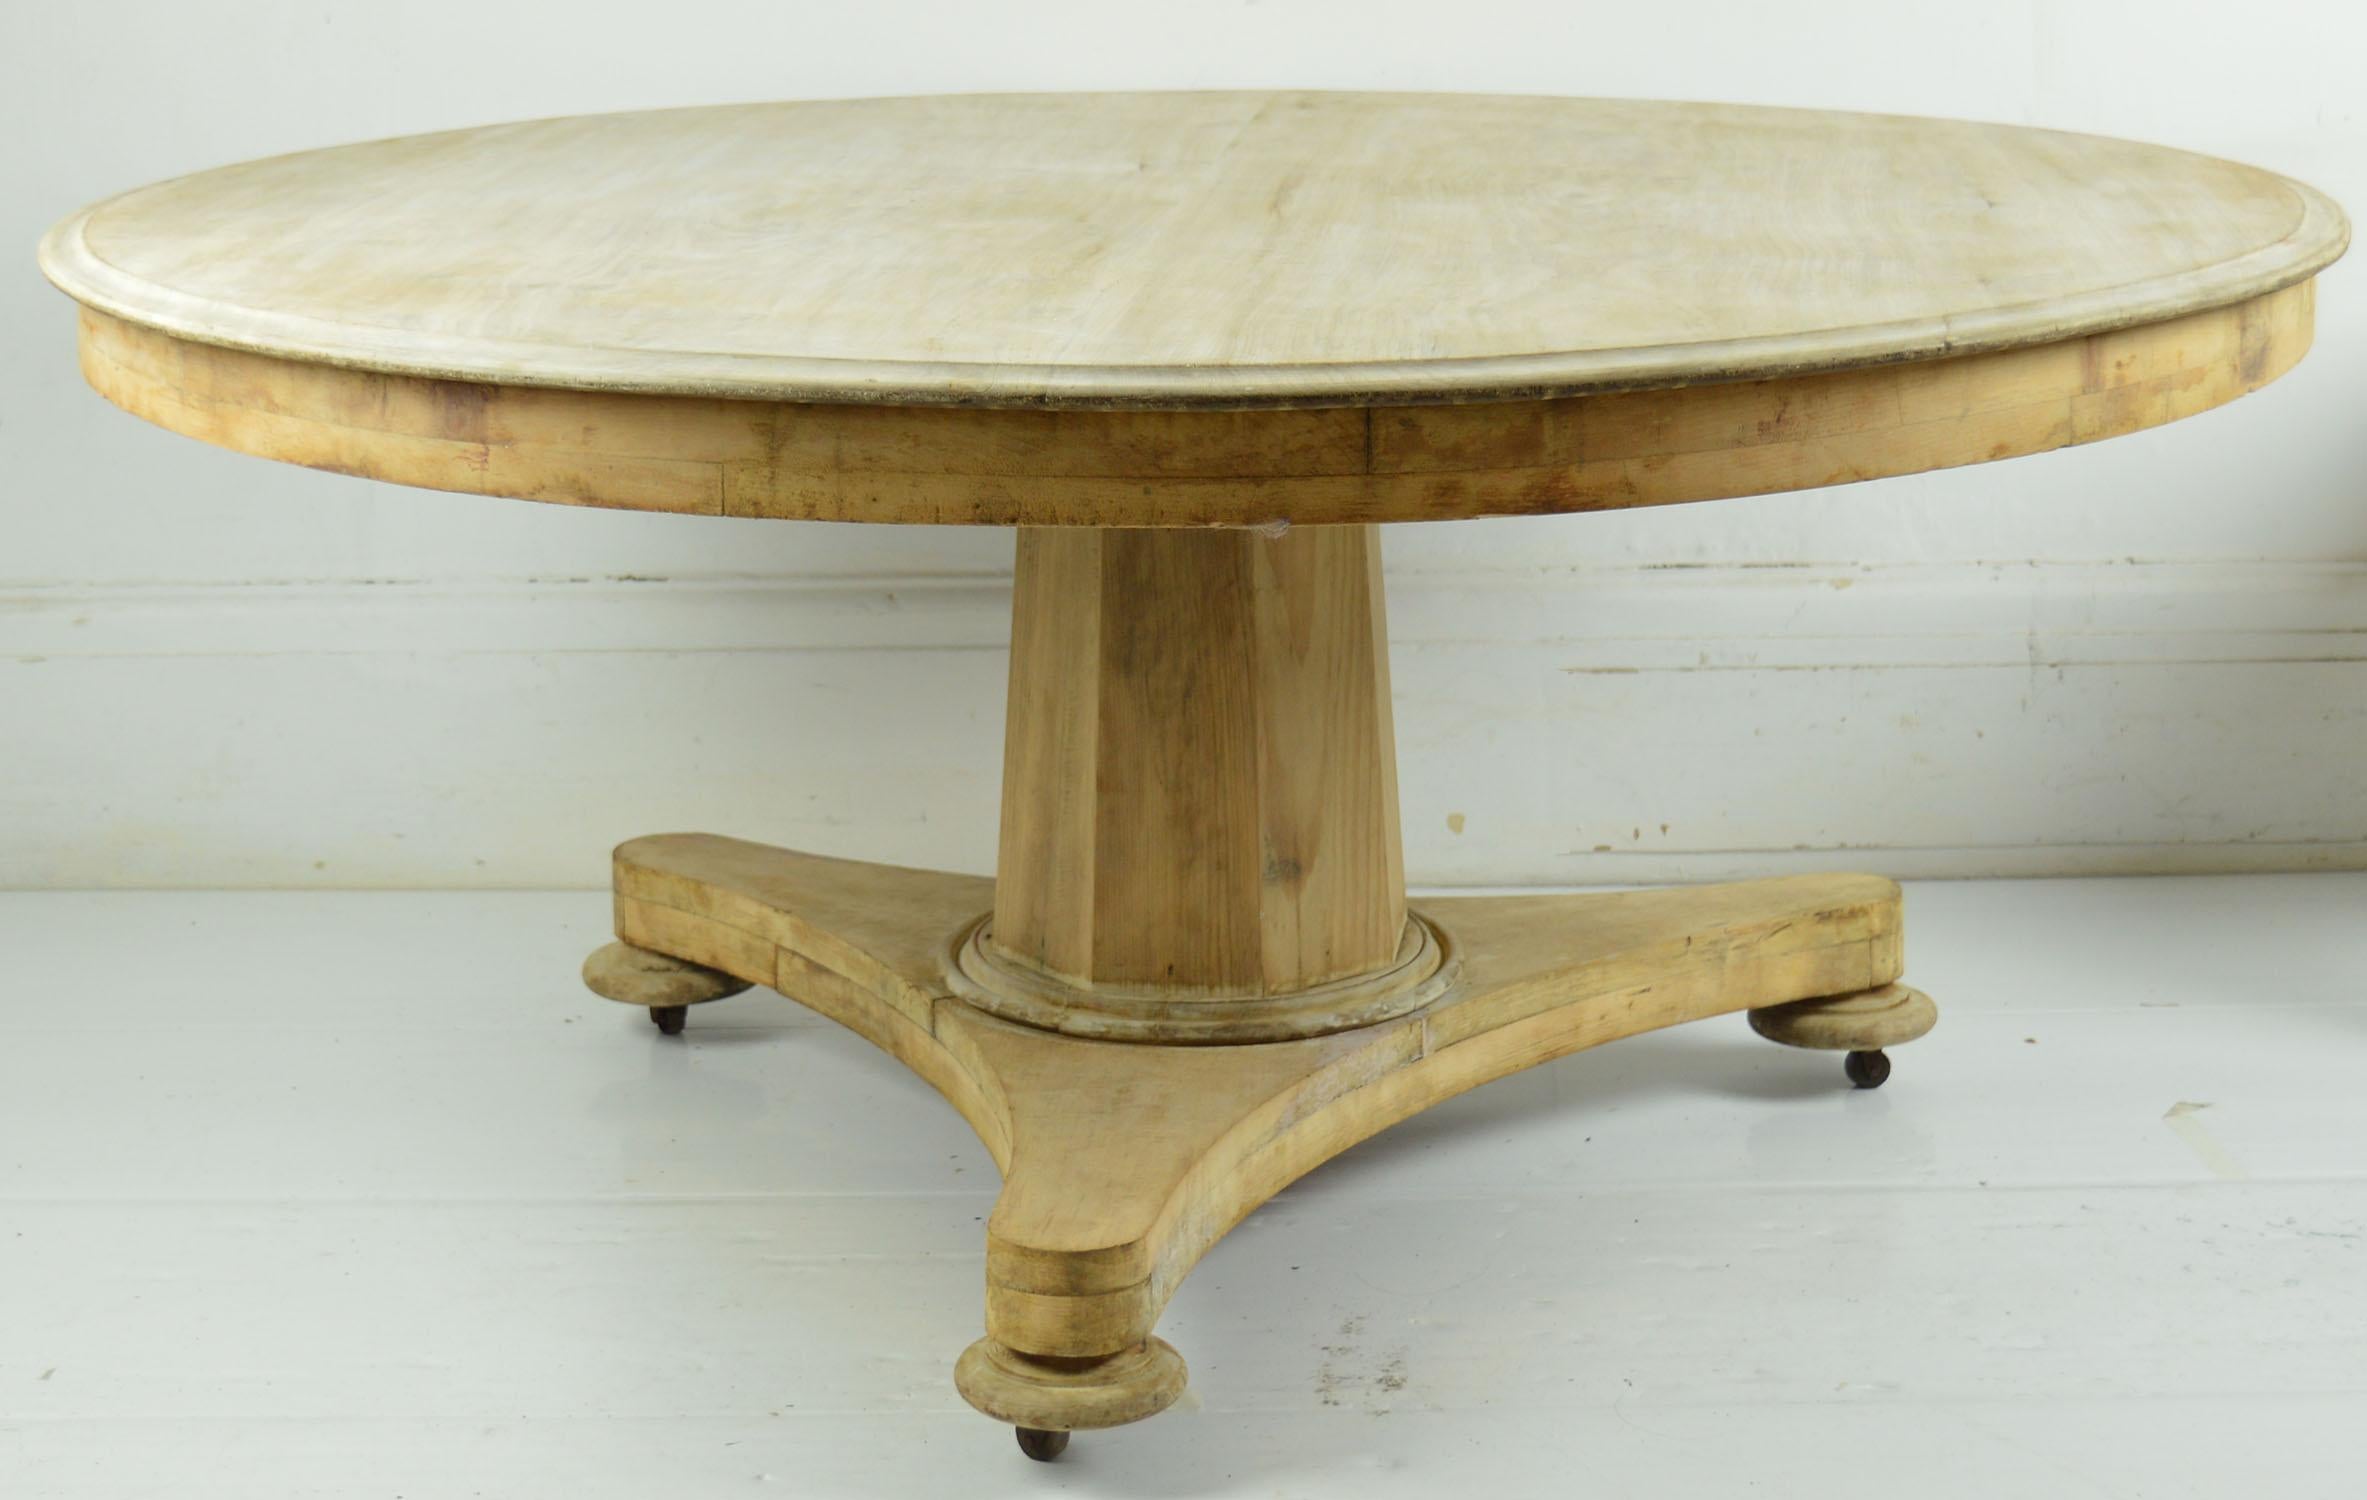 Fabulous small round table. Made from bleached Honduras mahogany and pine

I particularly like the simplicity of this table .

Beautifully figured top. 

Converted from a breakfast table, circa 1835.

On the original castors. 

I have